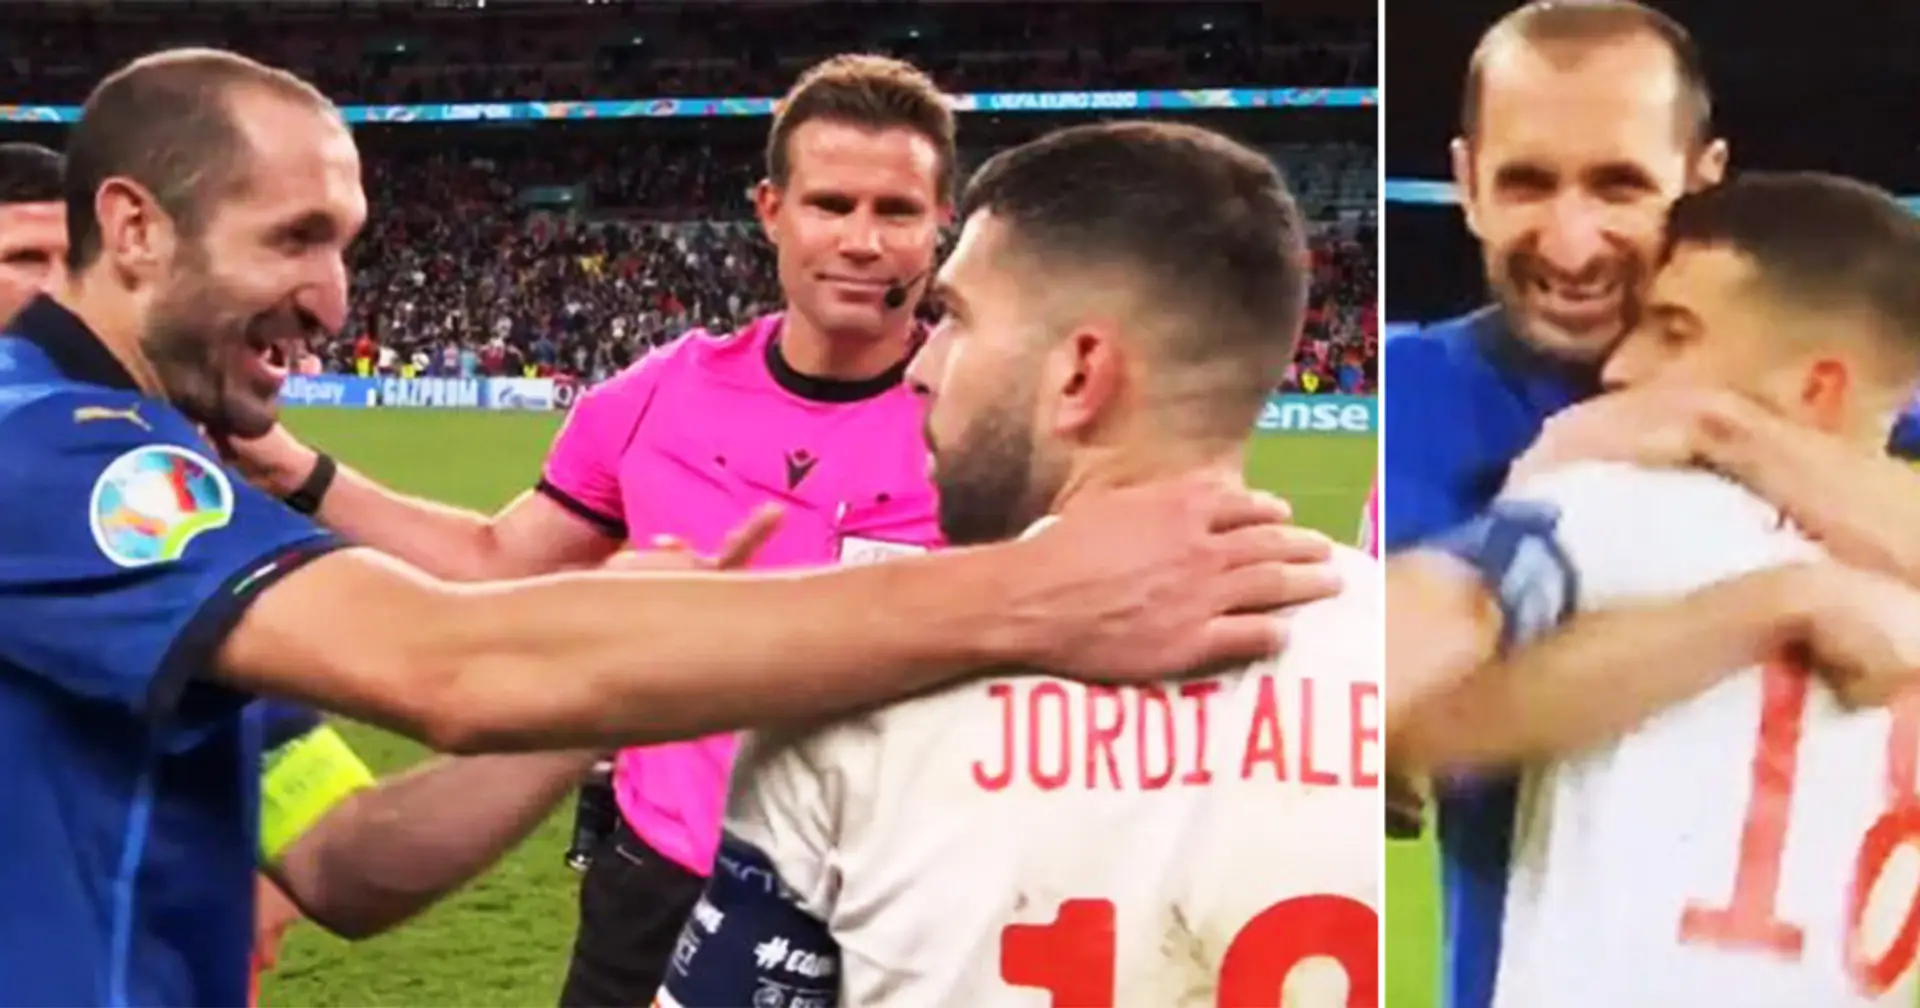 Revealed: What Chiellini told Jordi Alba while ‘bullying’ him before penalty shoot-out